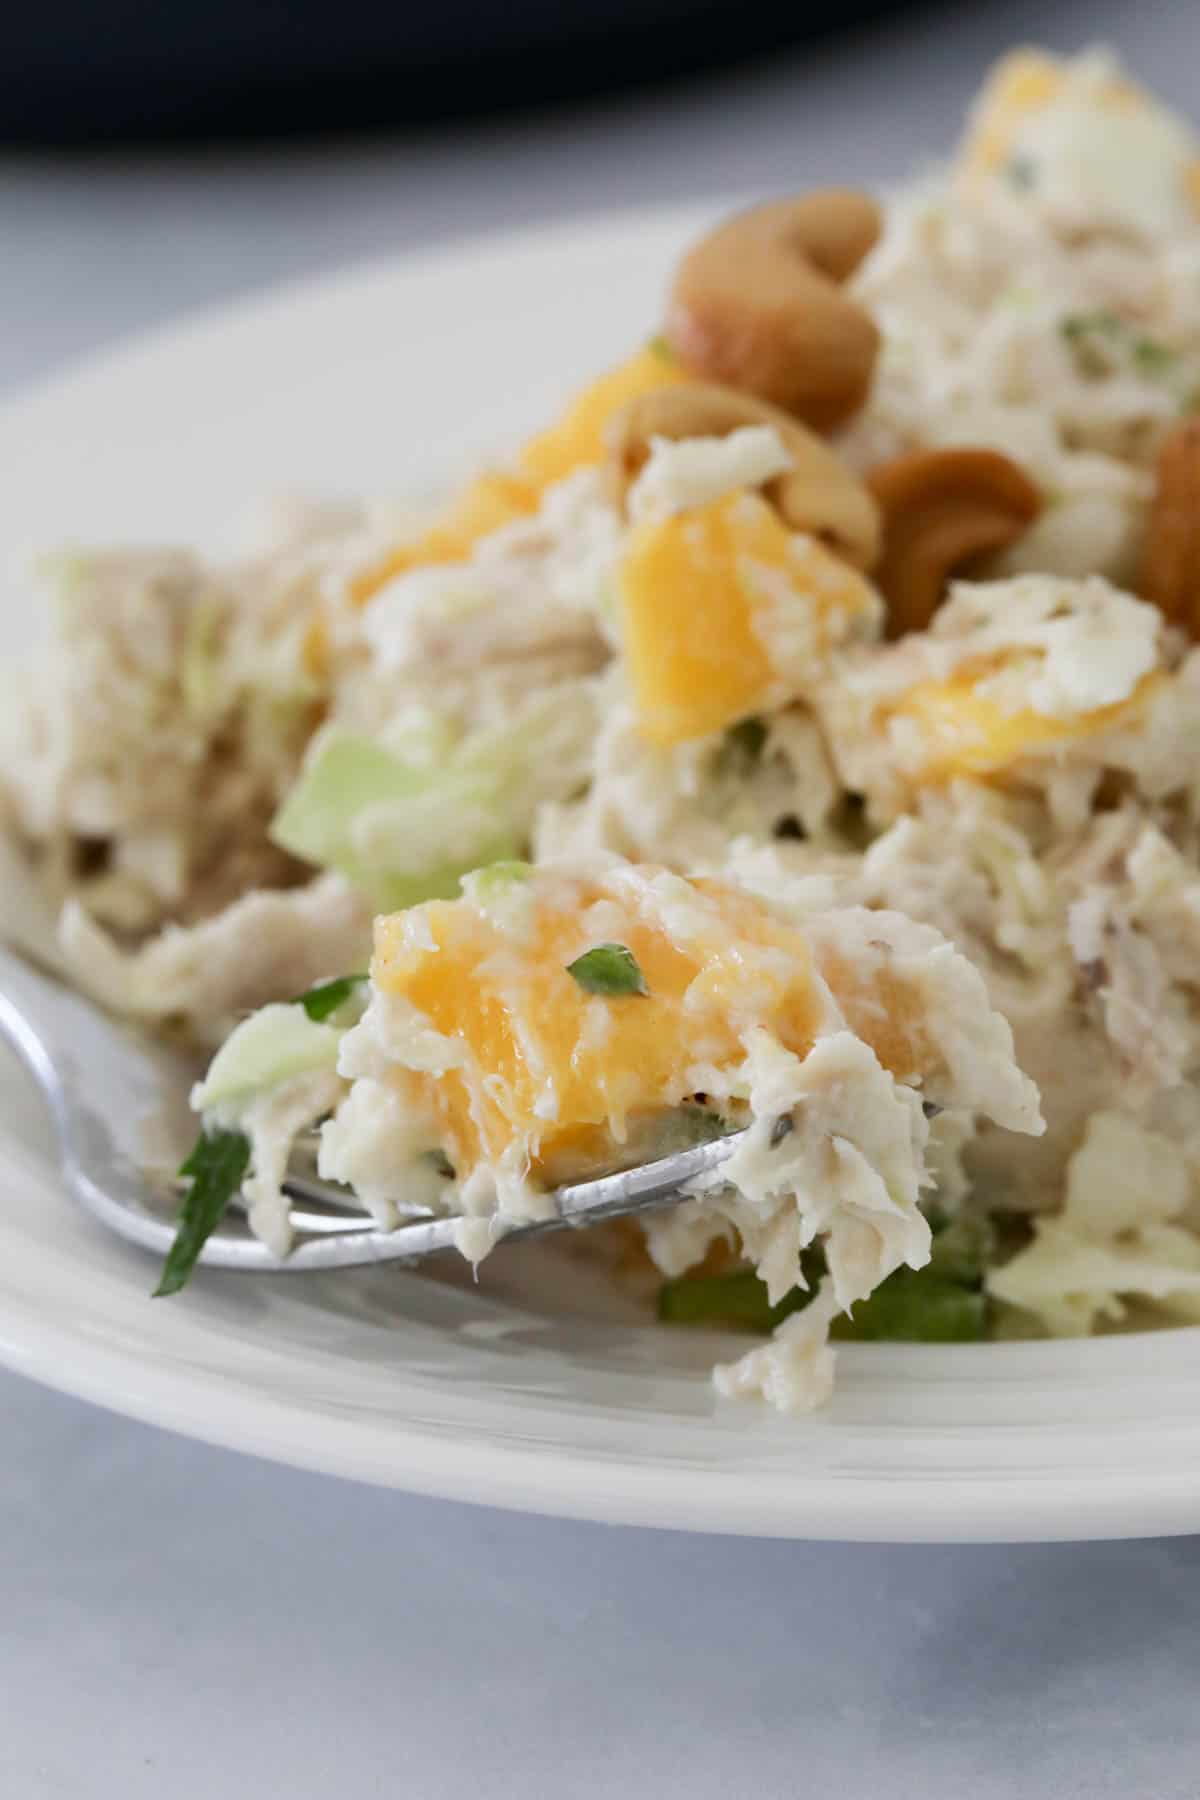 A chopped chicken, mango and cabbage salad.